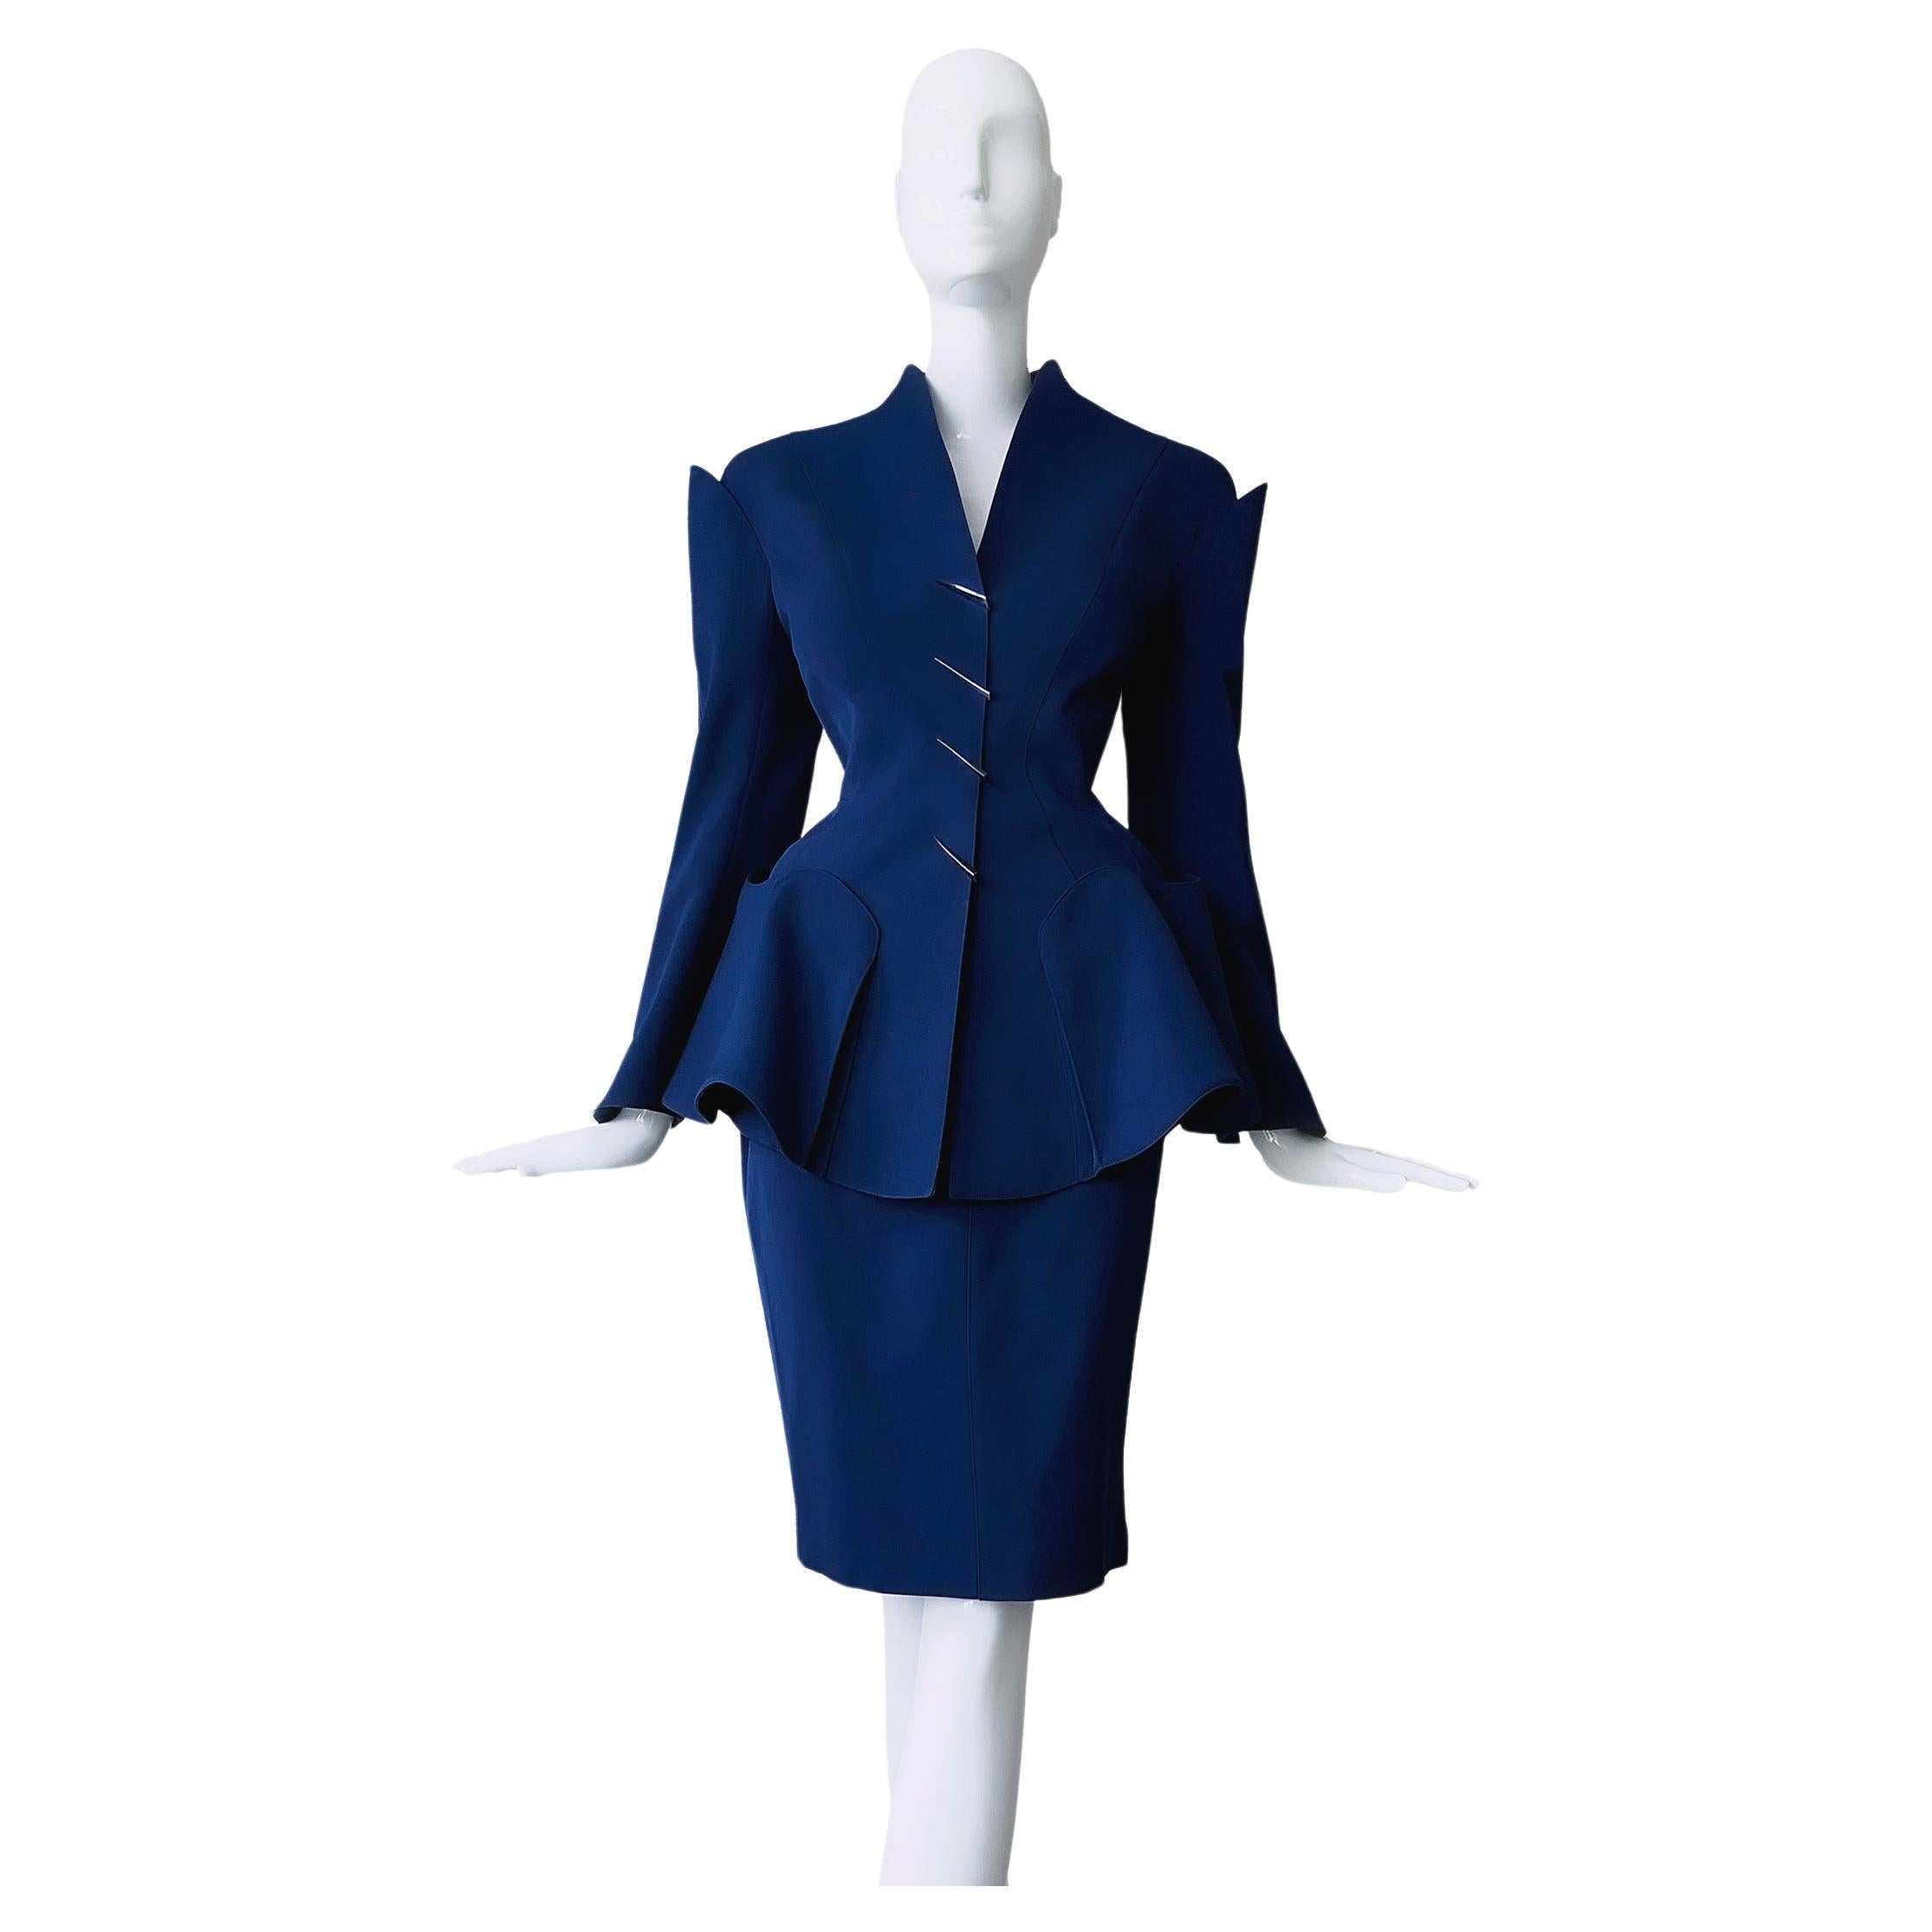 Thierry Mugler Scuptural Suit  FW 1995  Architecture Collection Metal Details For Sale